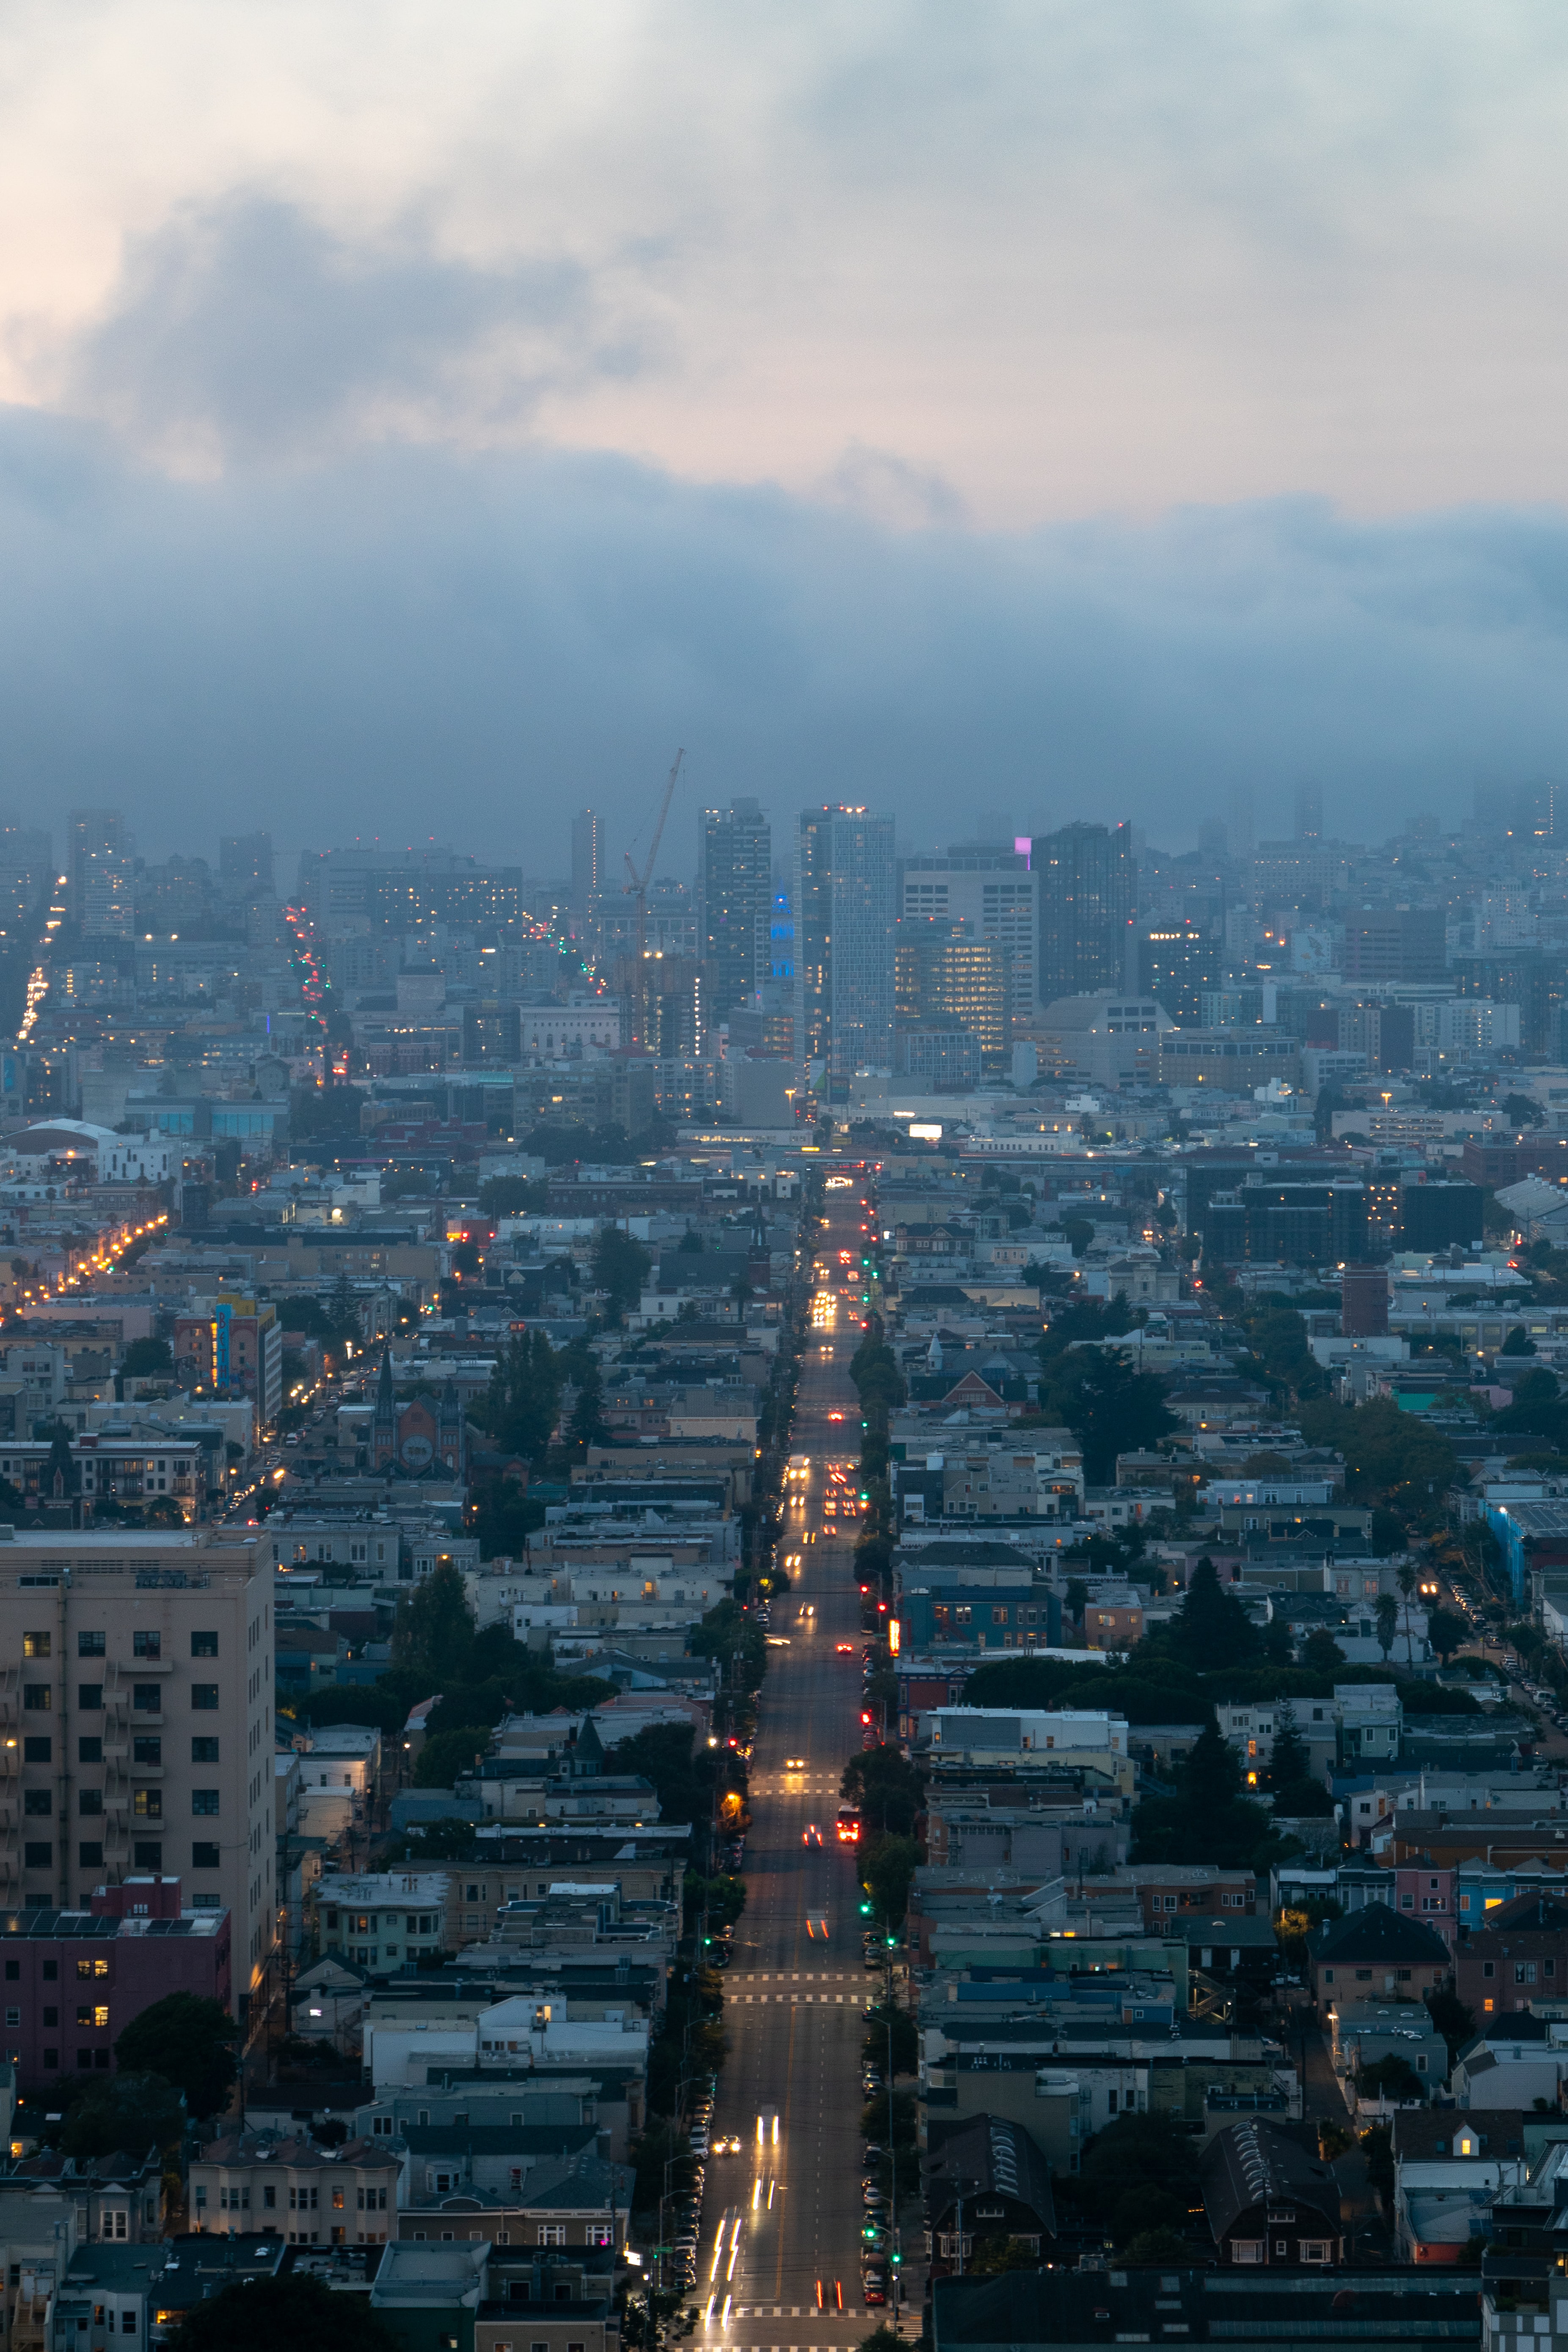 desktop Images street, cities, city, building, view from above, fog